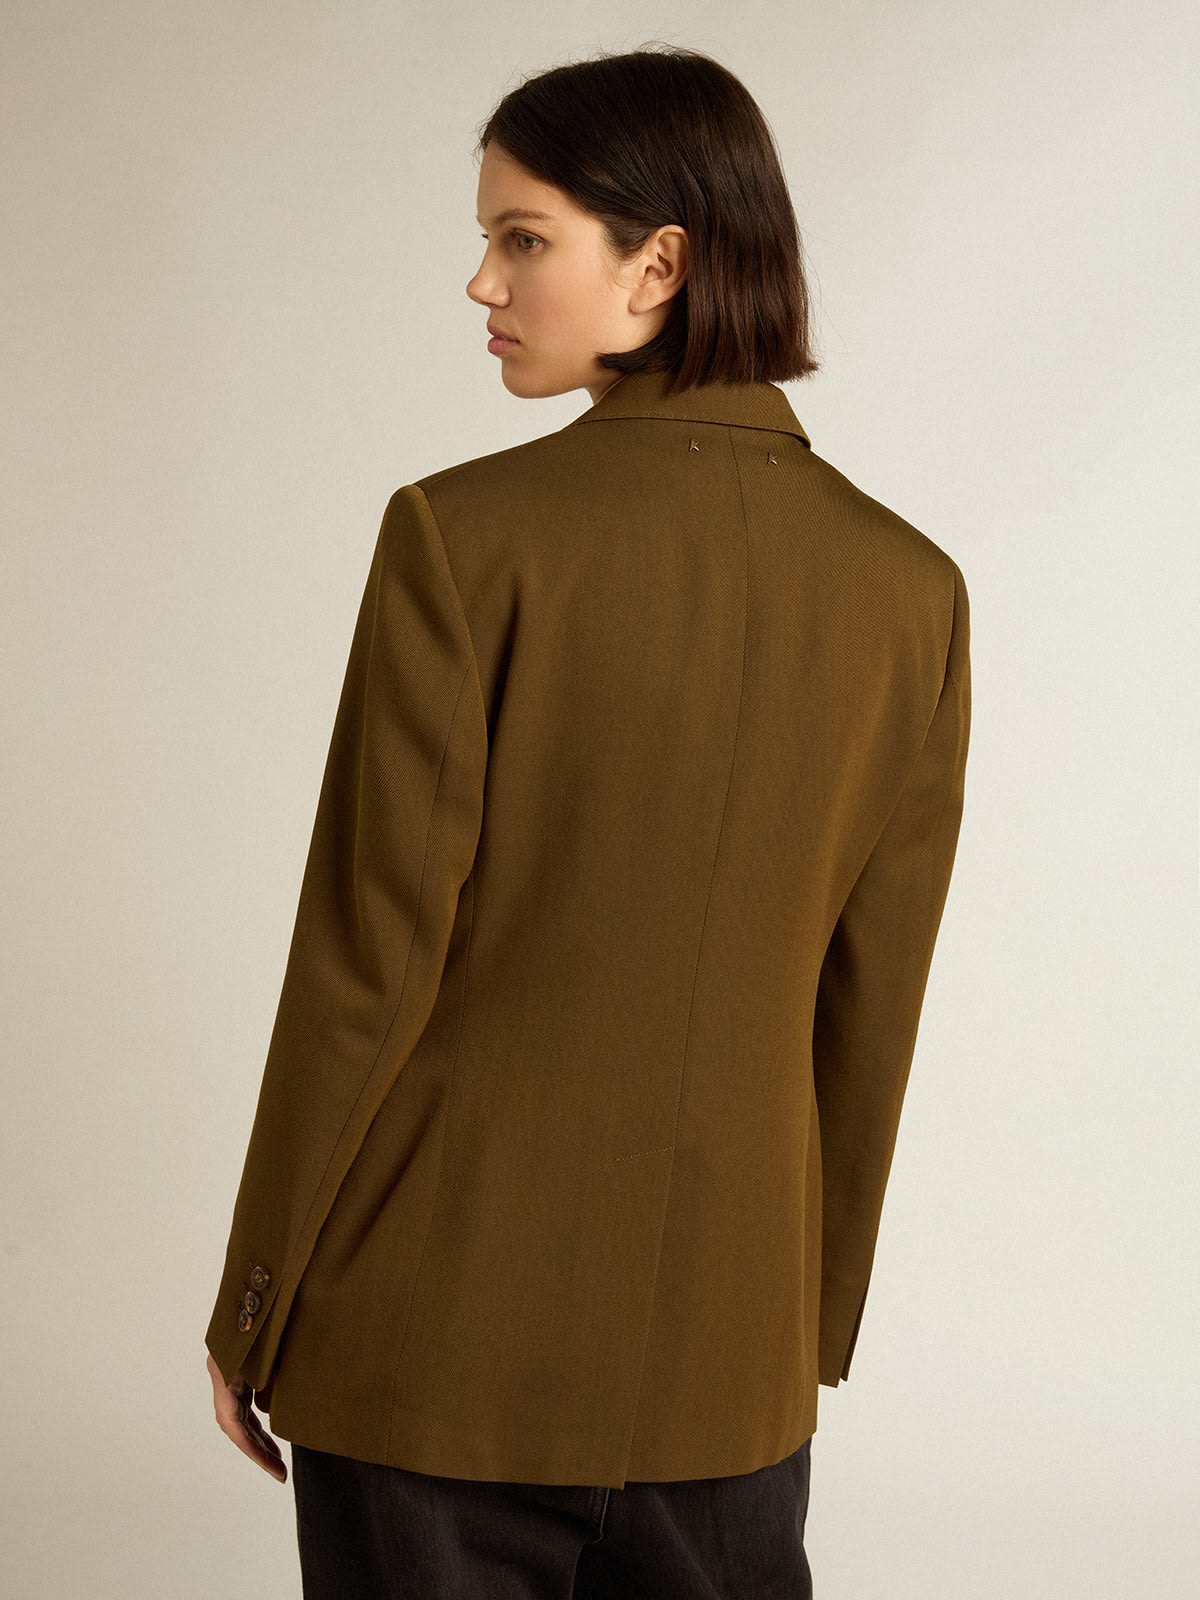 Golden Goose - Single-breasted jacket in beech-colored wool with horn buttons in 